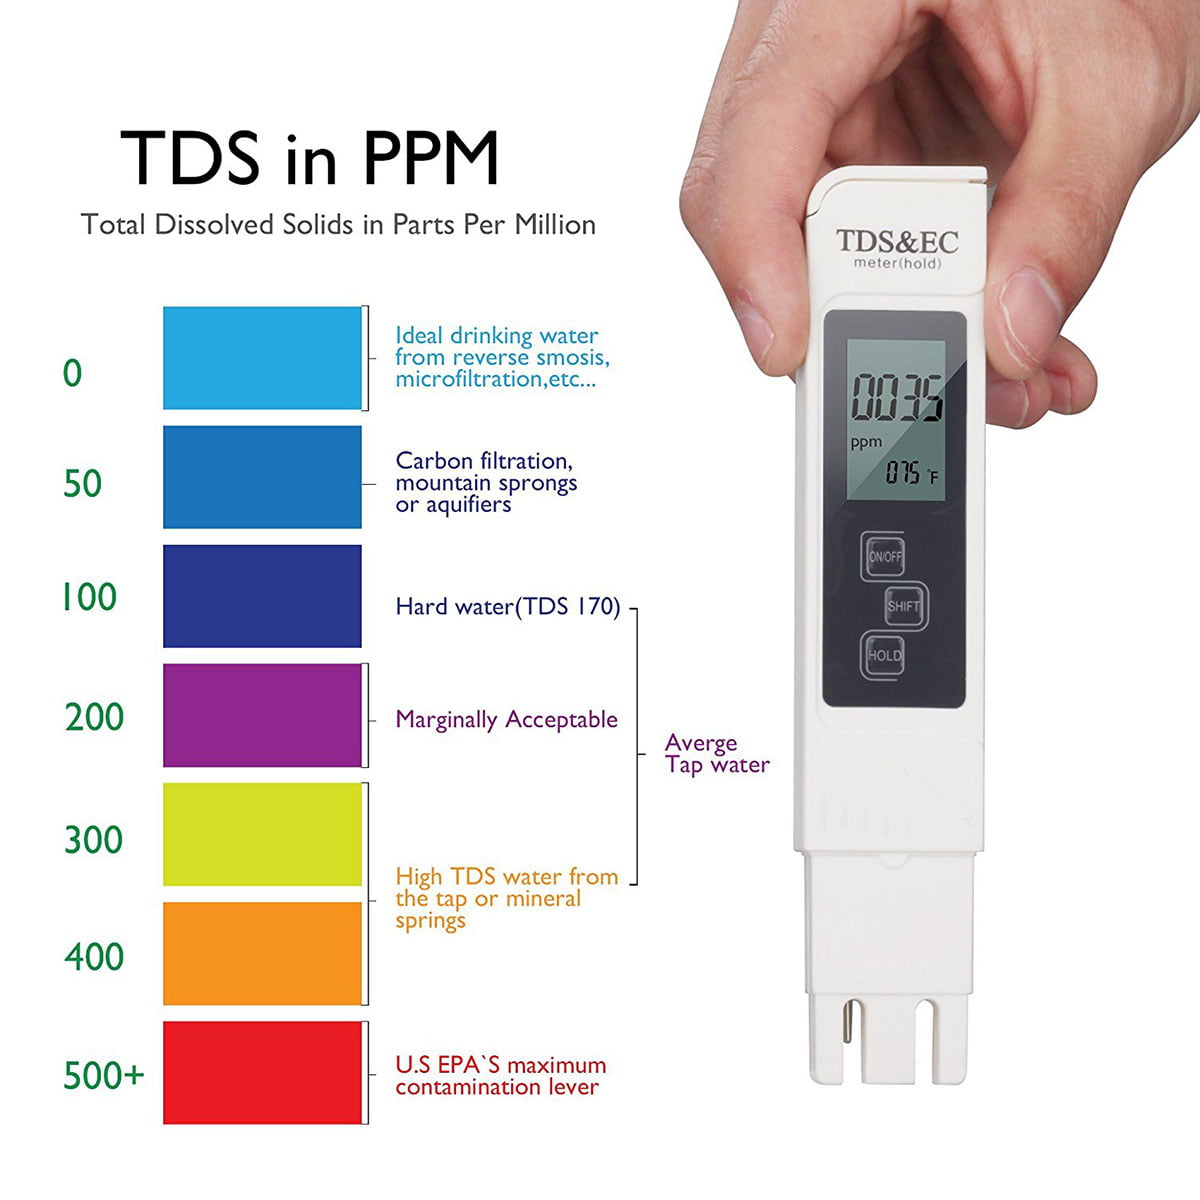 Hydroponics,Aquariums etc Vshinic Water Quality Tester Meter,TDS Meter with Backlit LCD，EC & Temperature Meter，Accurate Professional,Pool Water Test Kit 0-9990 ppm,Ideal for Drinking Water